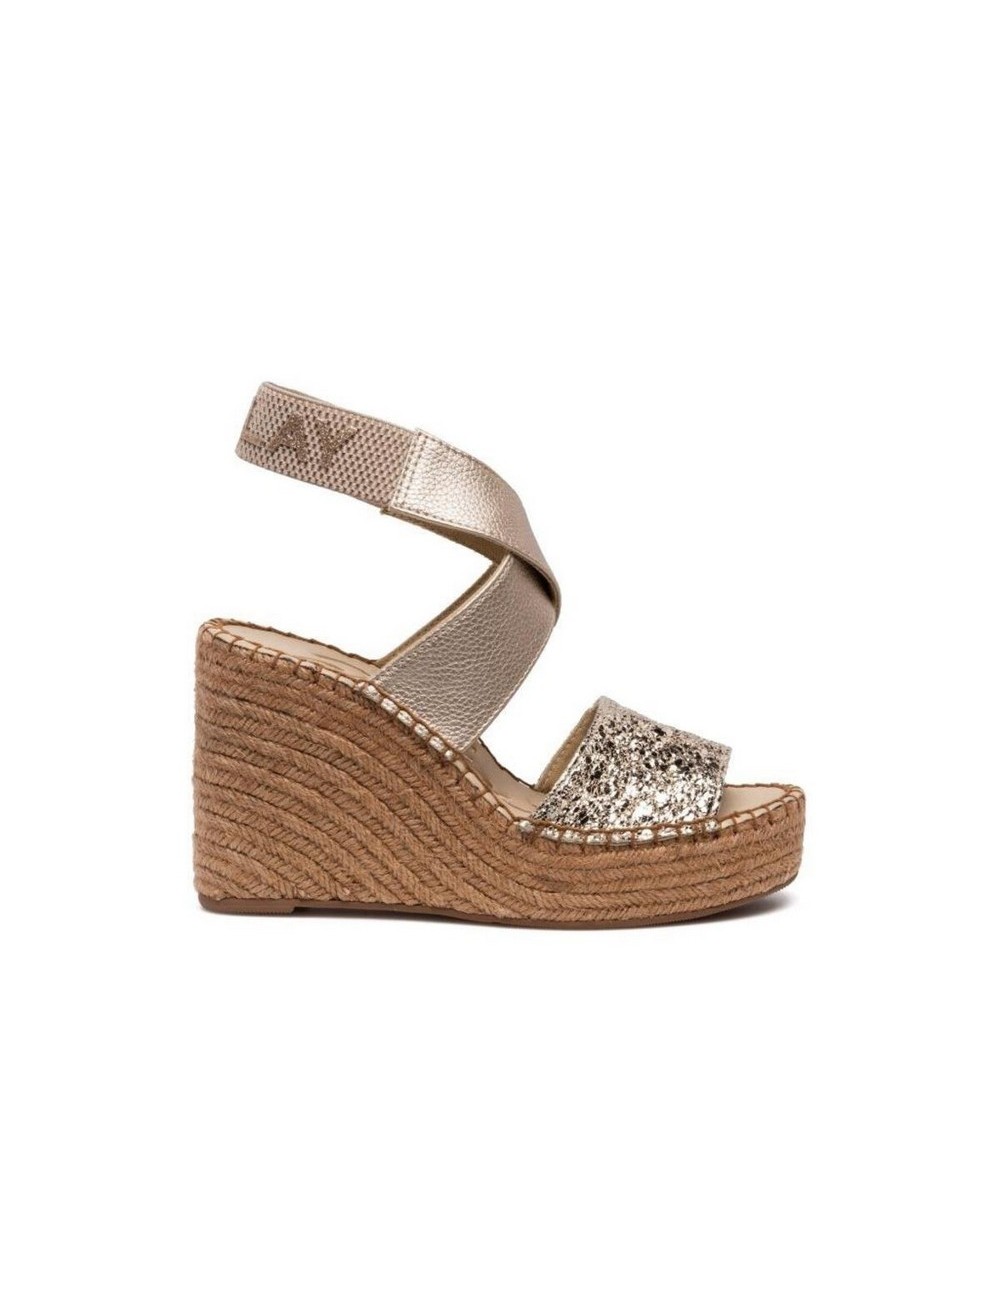 WOMEN'S SANDALS REPLAY JESS PARTY PLATIN